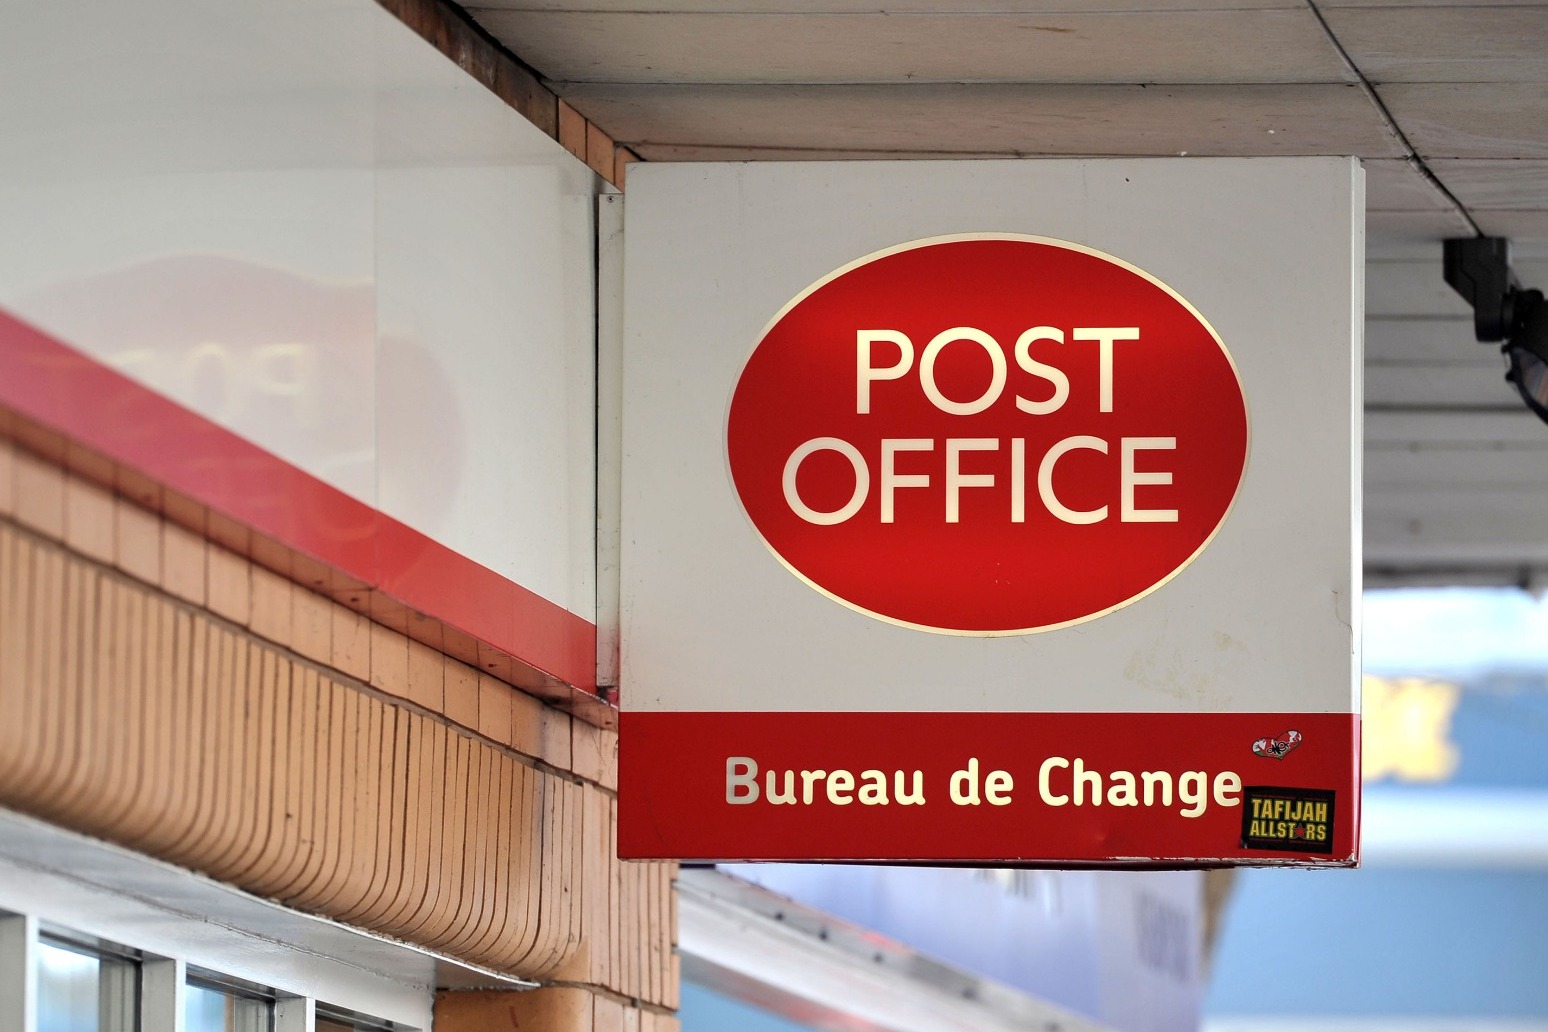 MPs demand Government fully compensates all victims of Post Office scandal